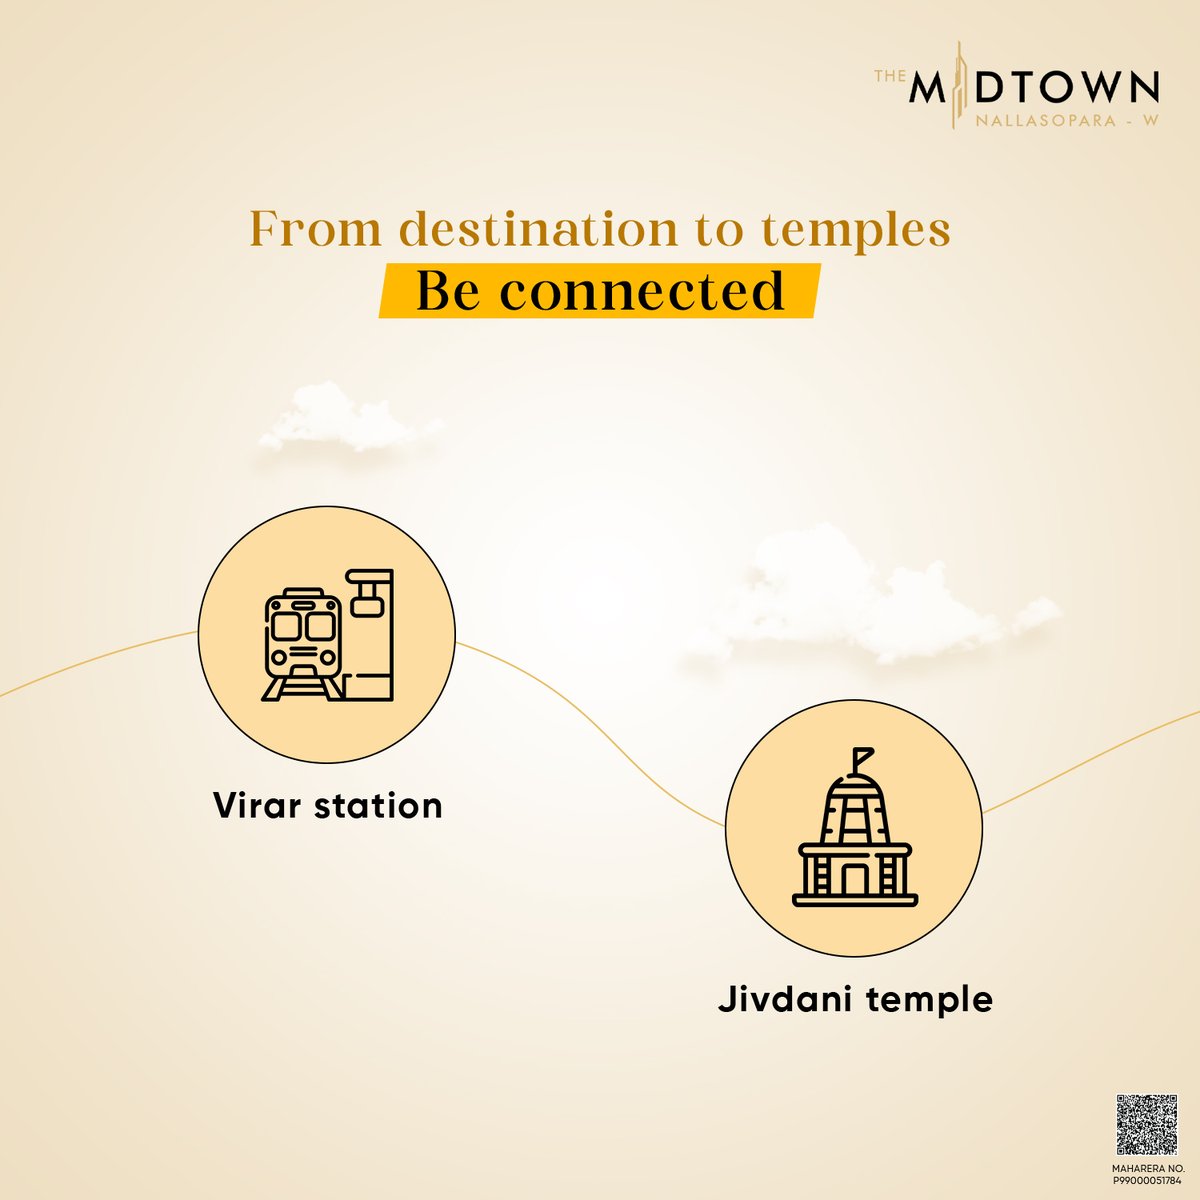 Experience easy commutes and blessings of Jivdani devi when you live #InTheMidOfTheTown

#TheMidtown #WeAreTheMidtown #RealEstate #RealEstateDevelopers #MidtownConvenience #EasyCommute #AccessibleLiving #CommercialRealEstate #Connected #PrimeLocation #Nallasopara #Virar #Mumbai